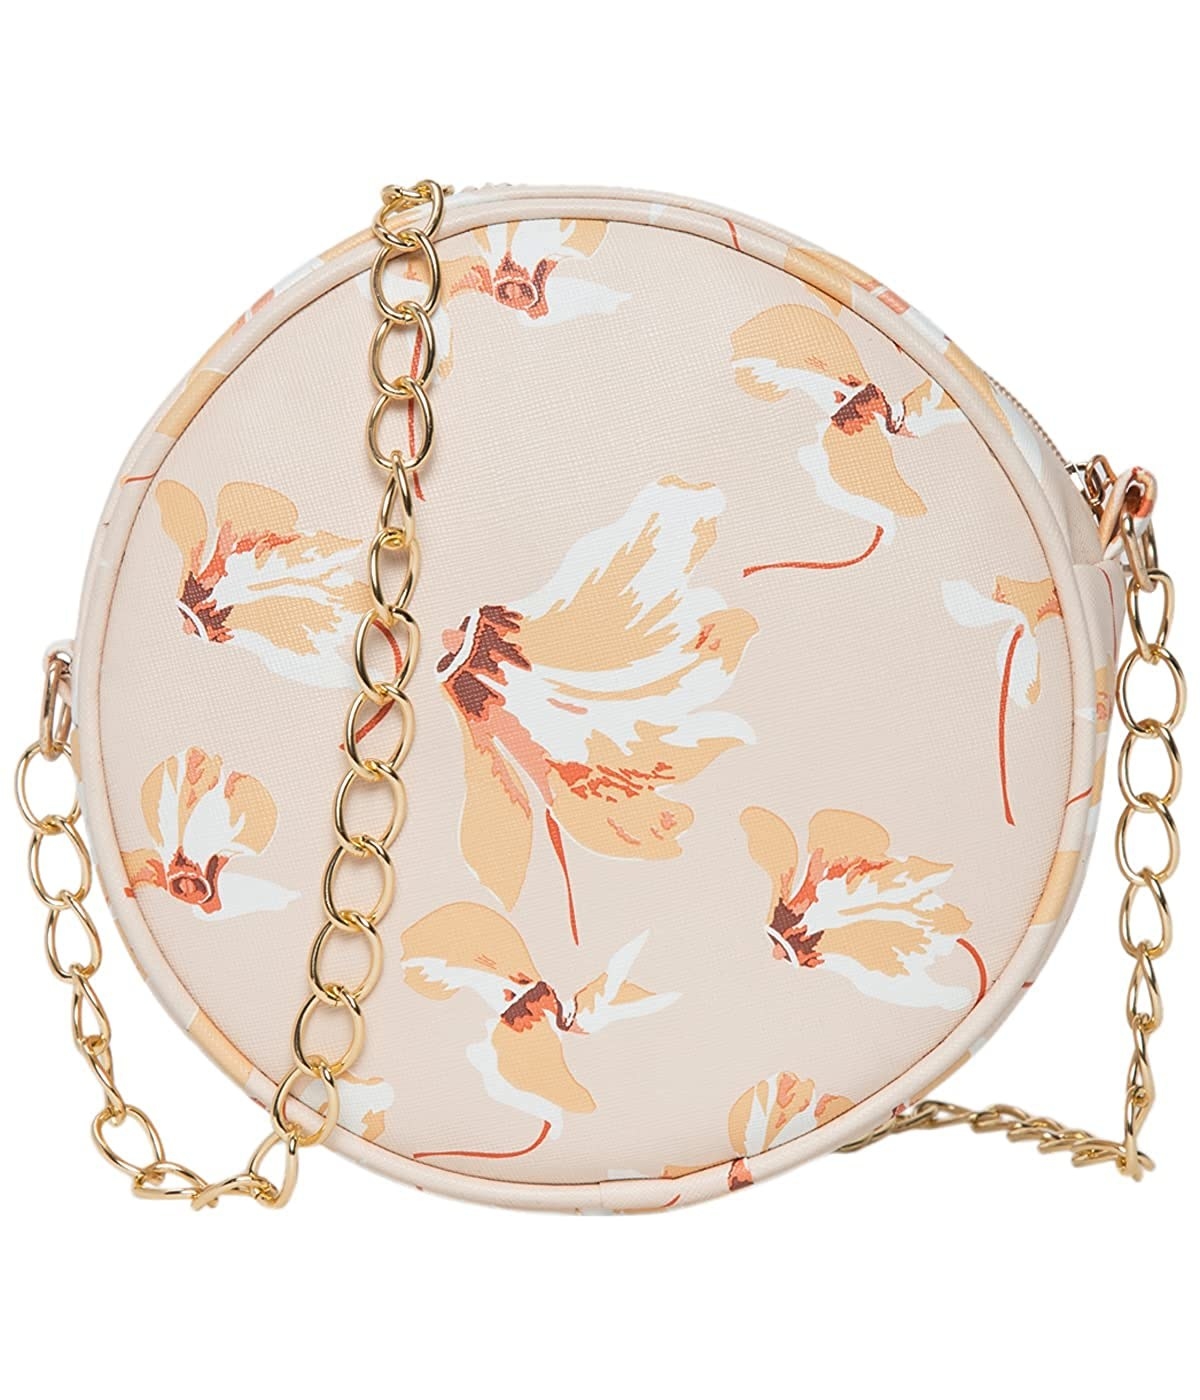 A round beige sling bag with a golden chain for a strap and a floral design on the body